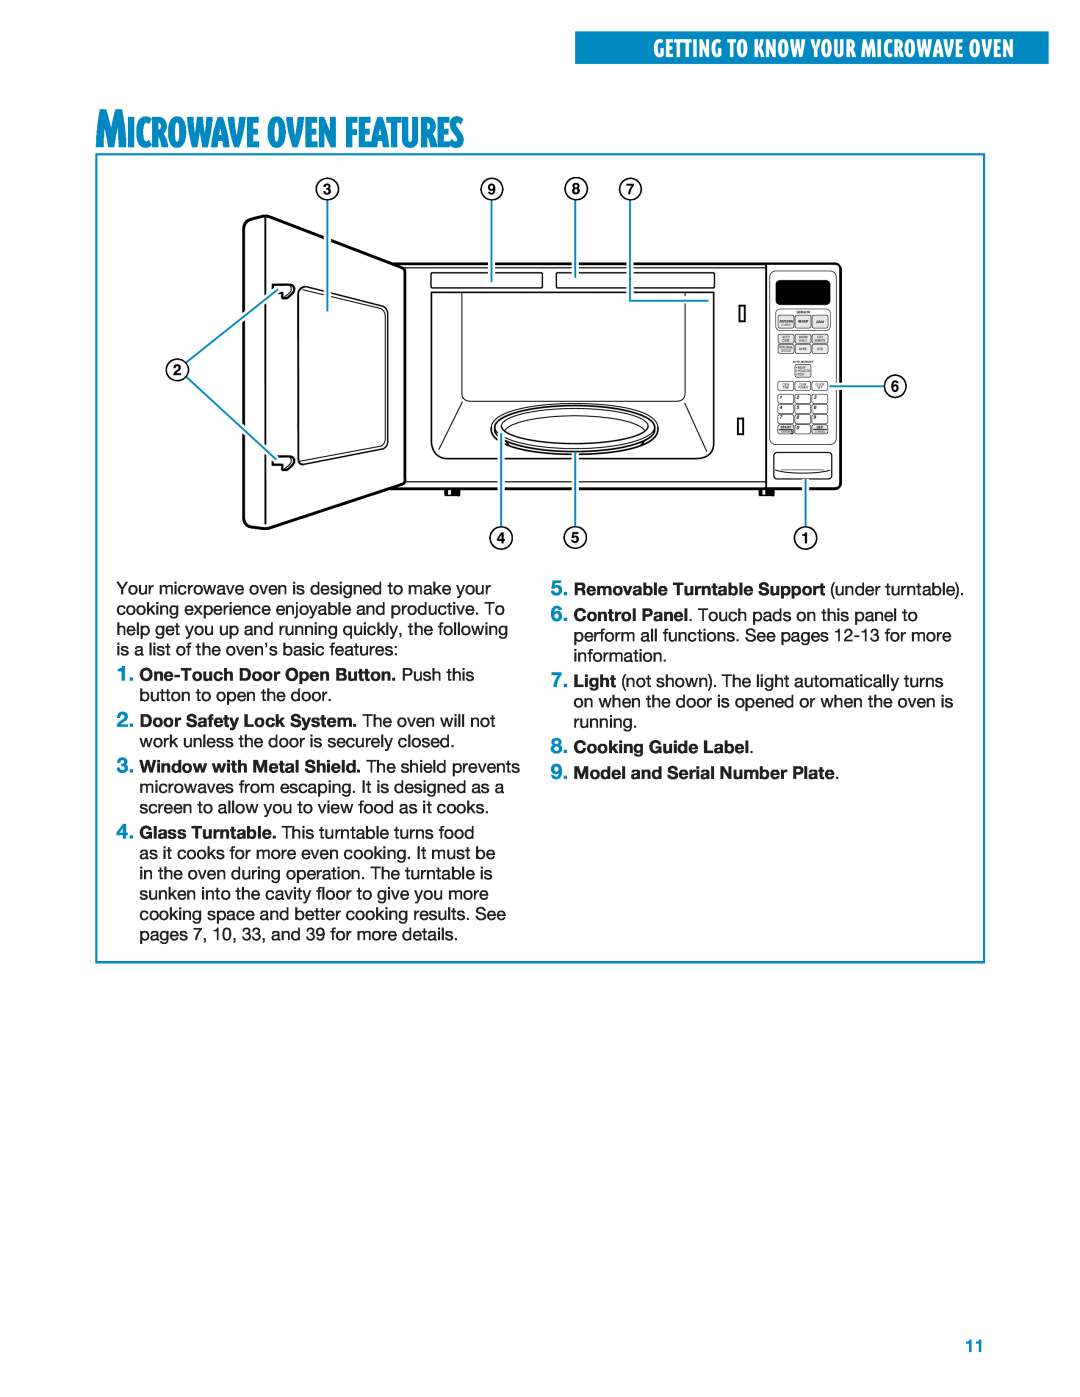 Whirlpool MT1195SG, MT1135SG installation instructions Microwave Oven Features, Getting To Know Your Microwave Oven 